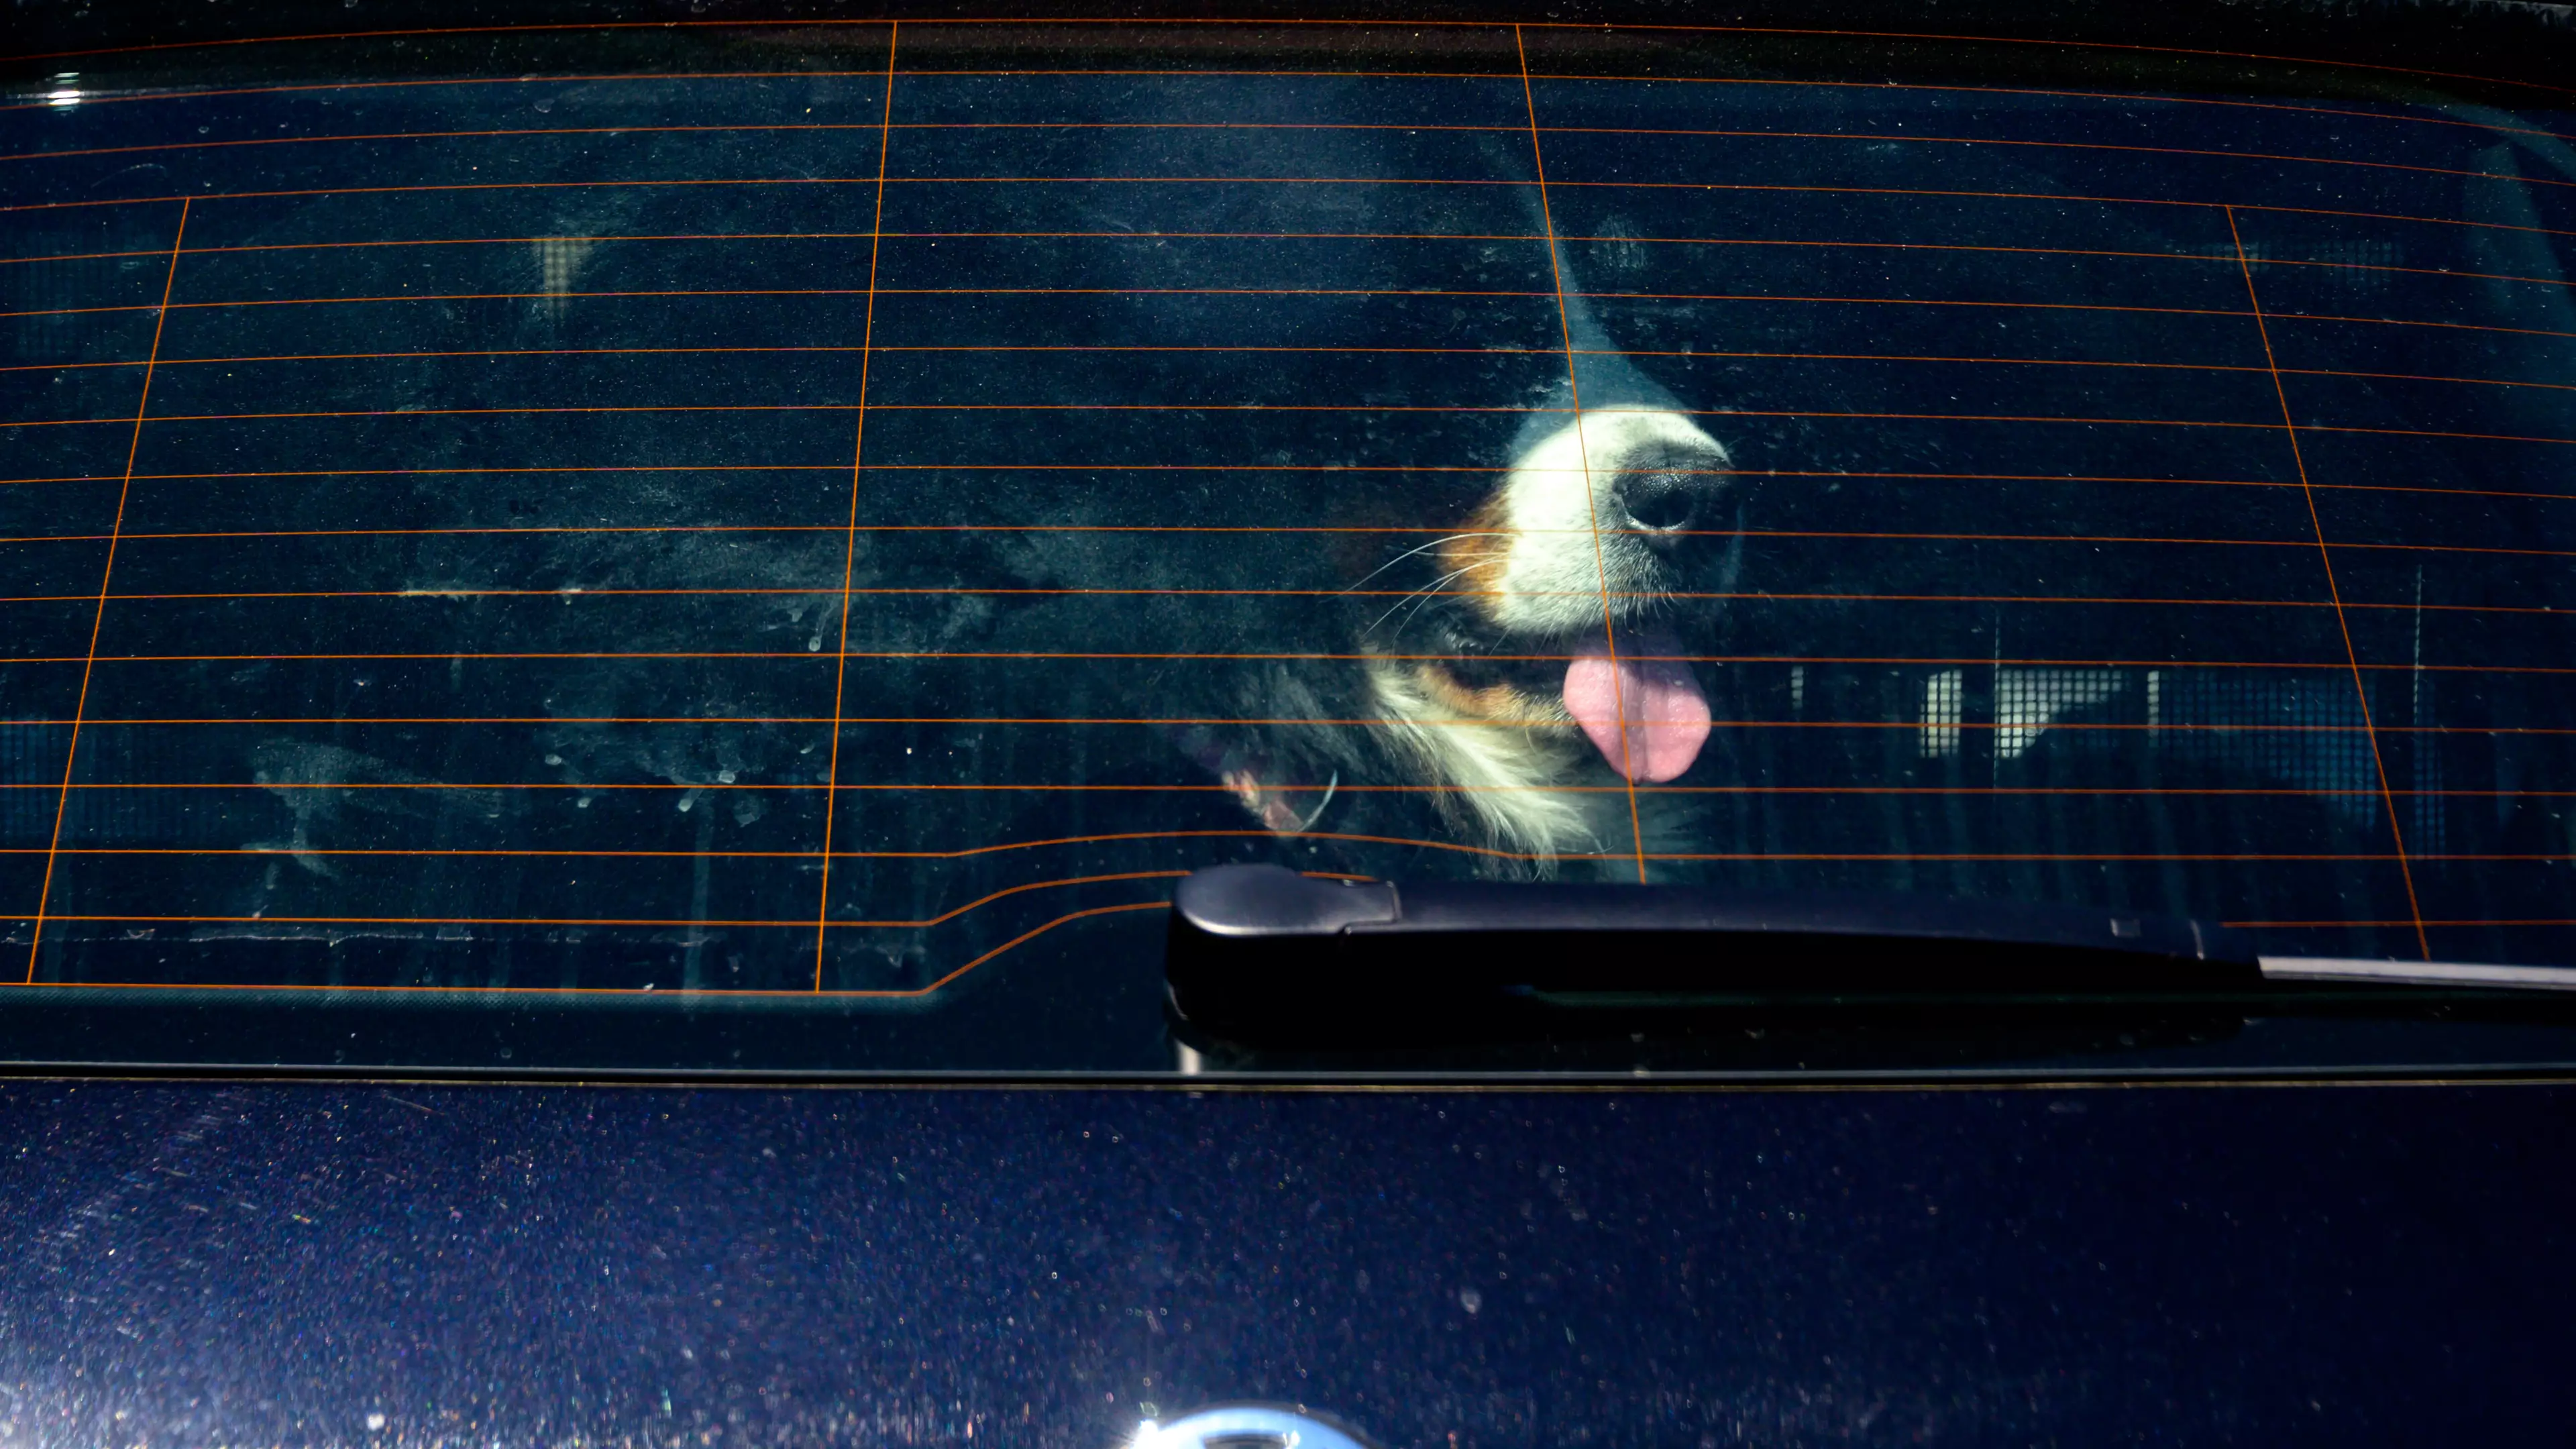 Two Dogs Rescued After Being Left In Hot Car